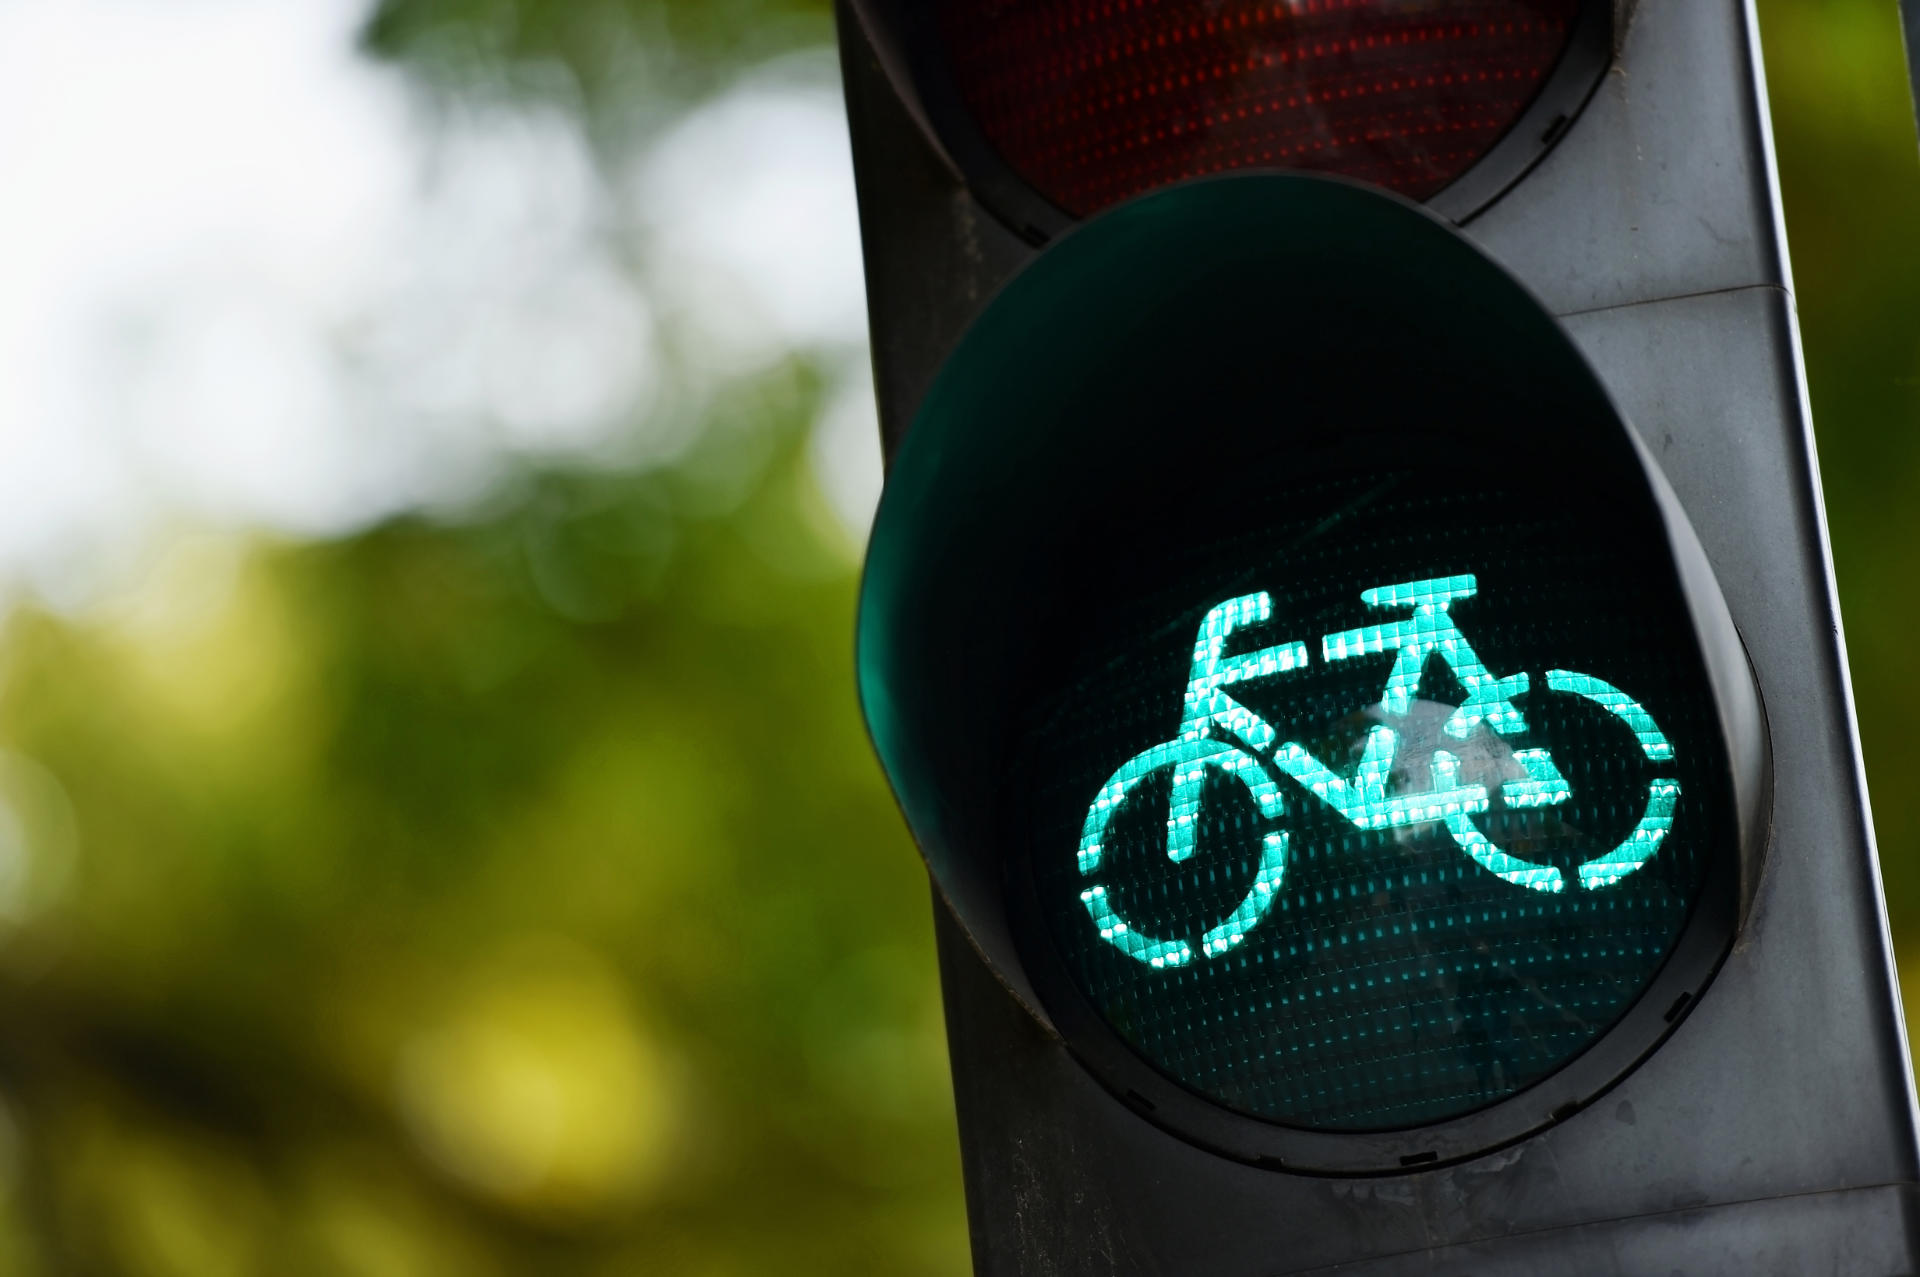 Green light on bicycle traffic signal